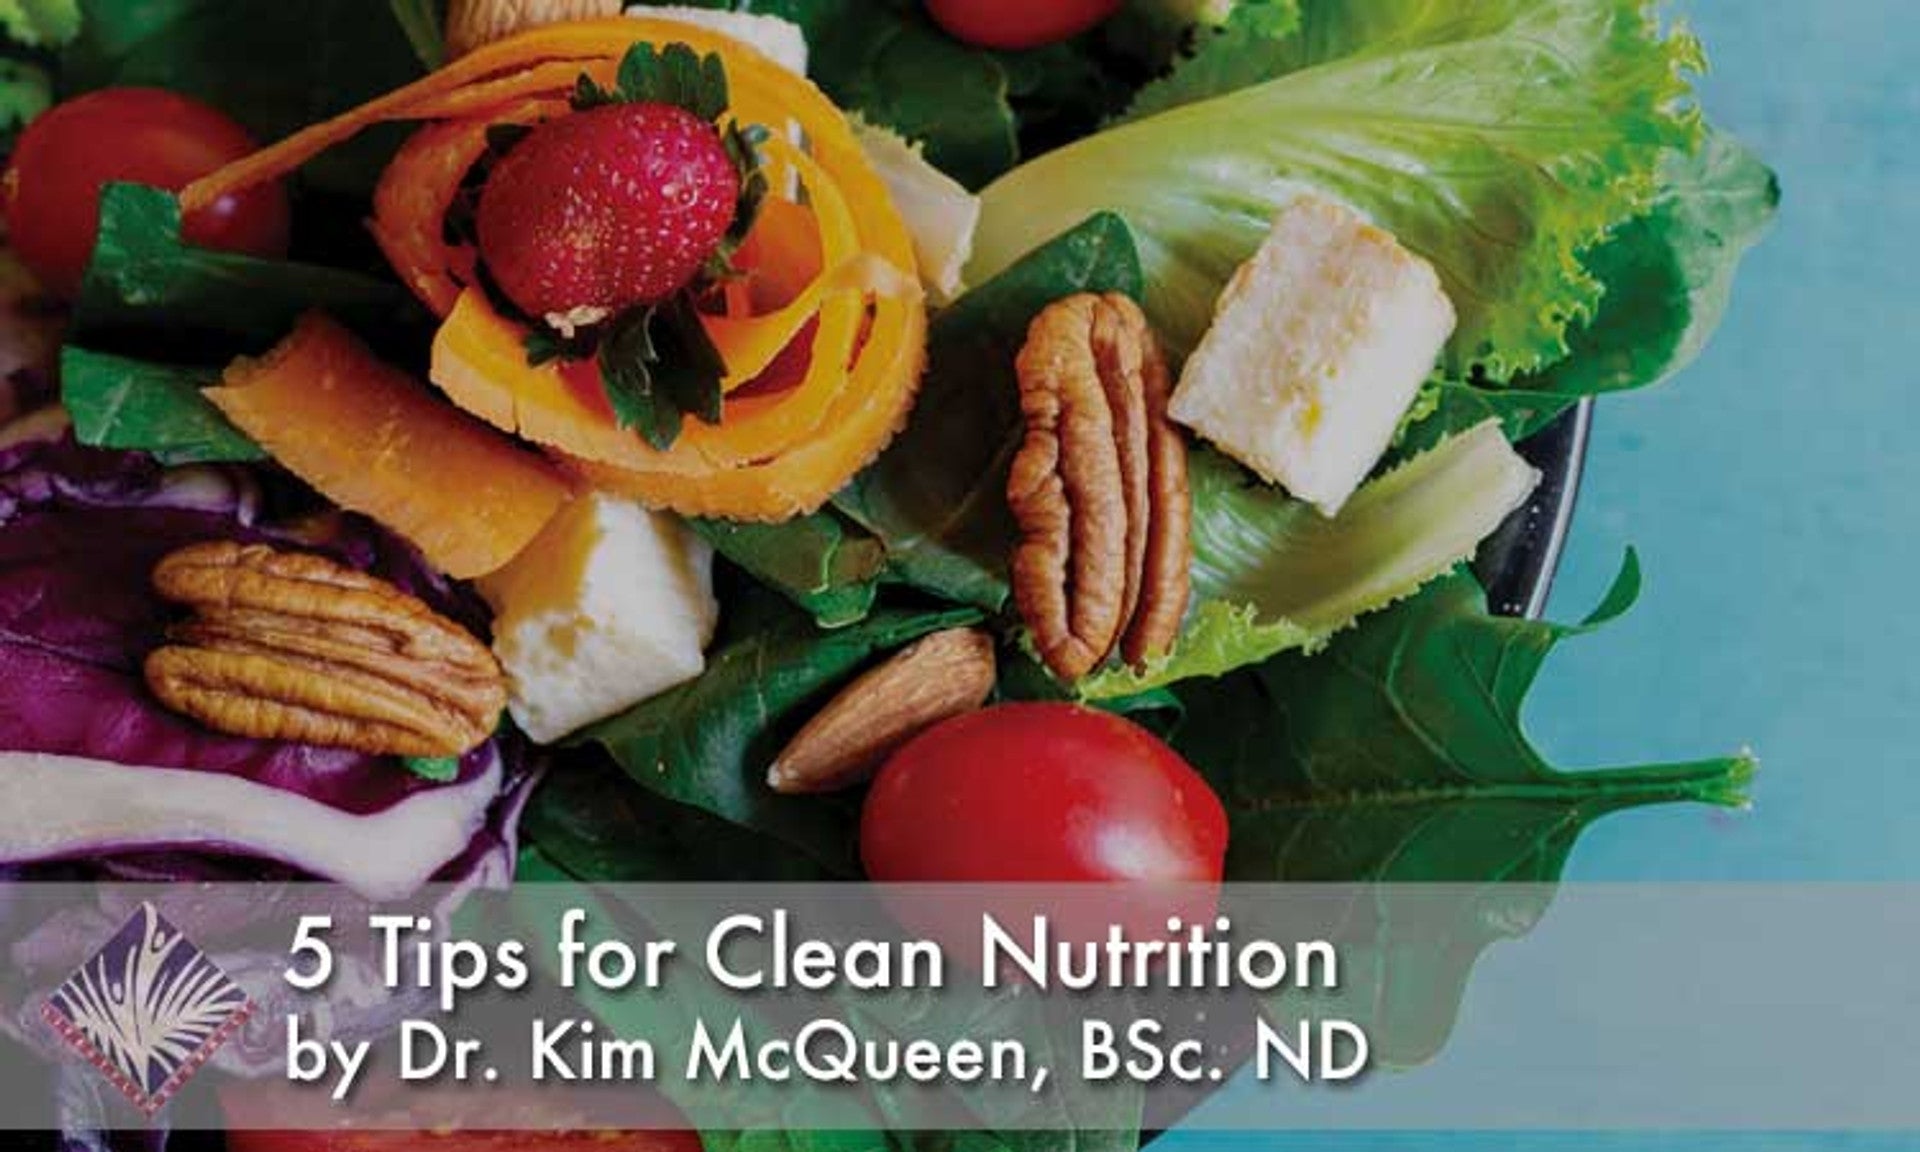 5 Tips for Clean Nutrition